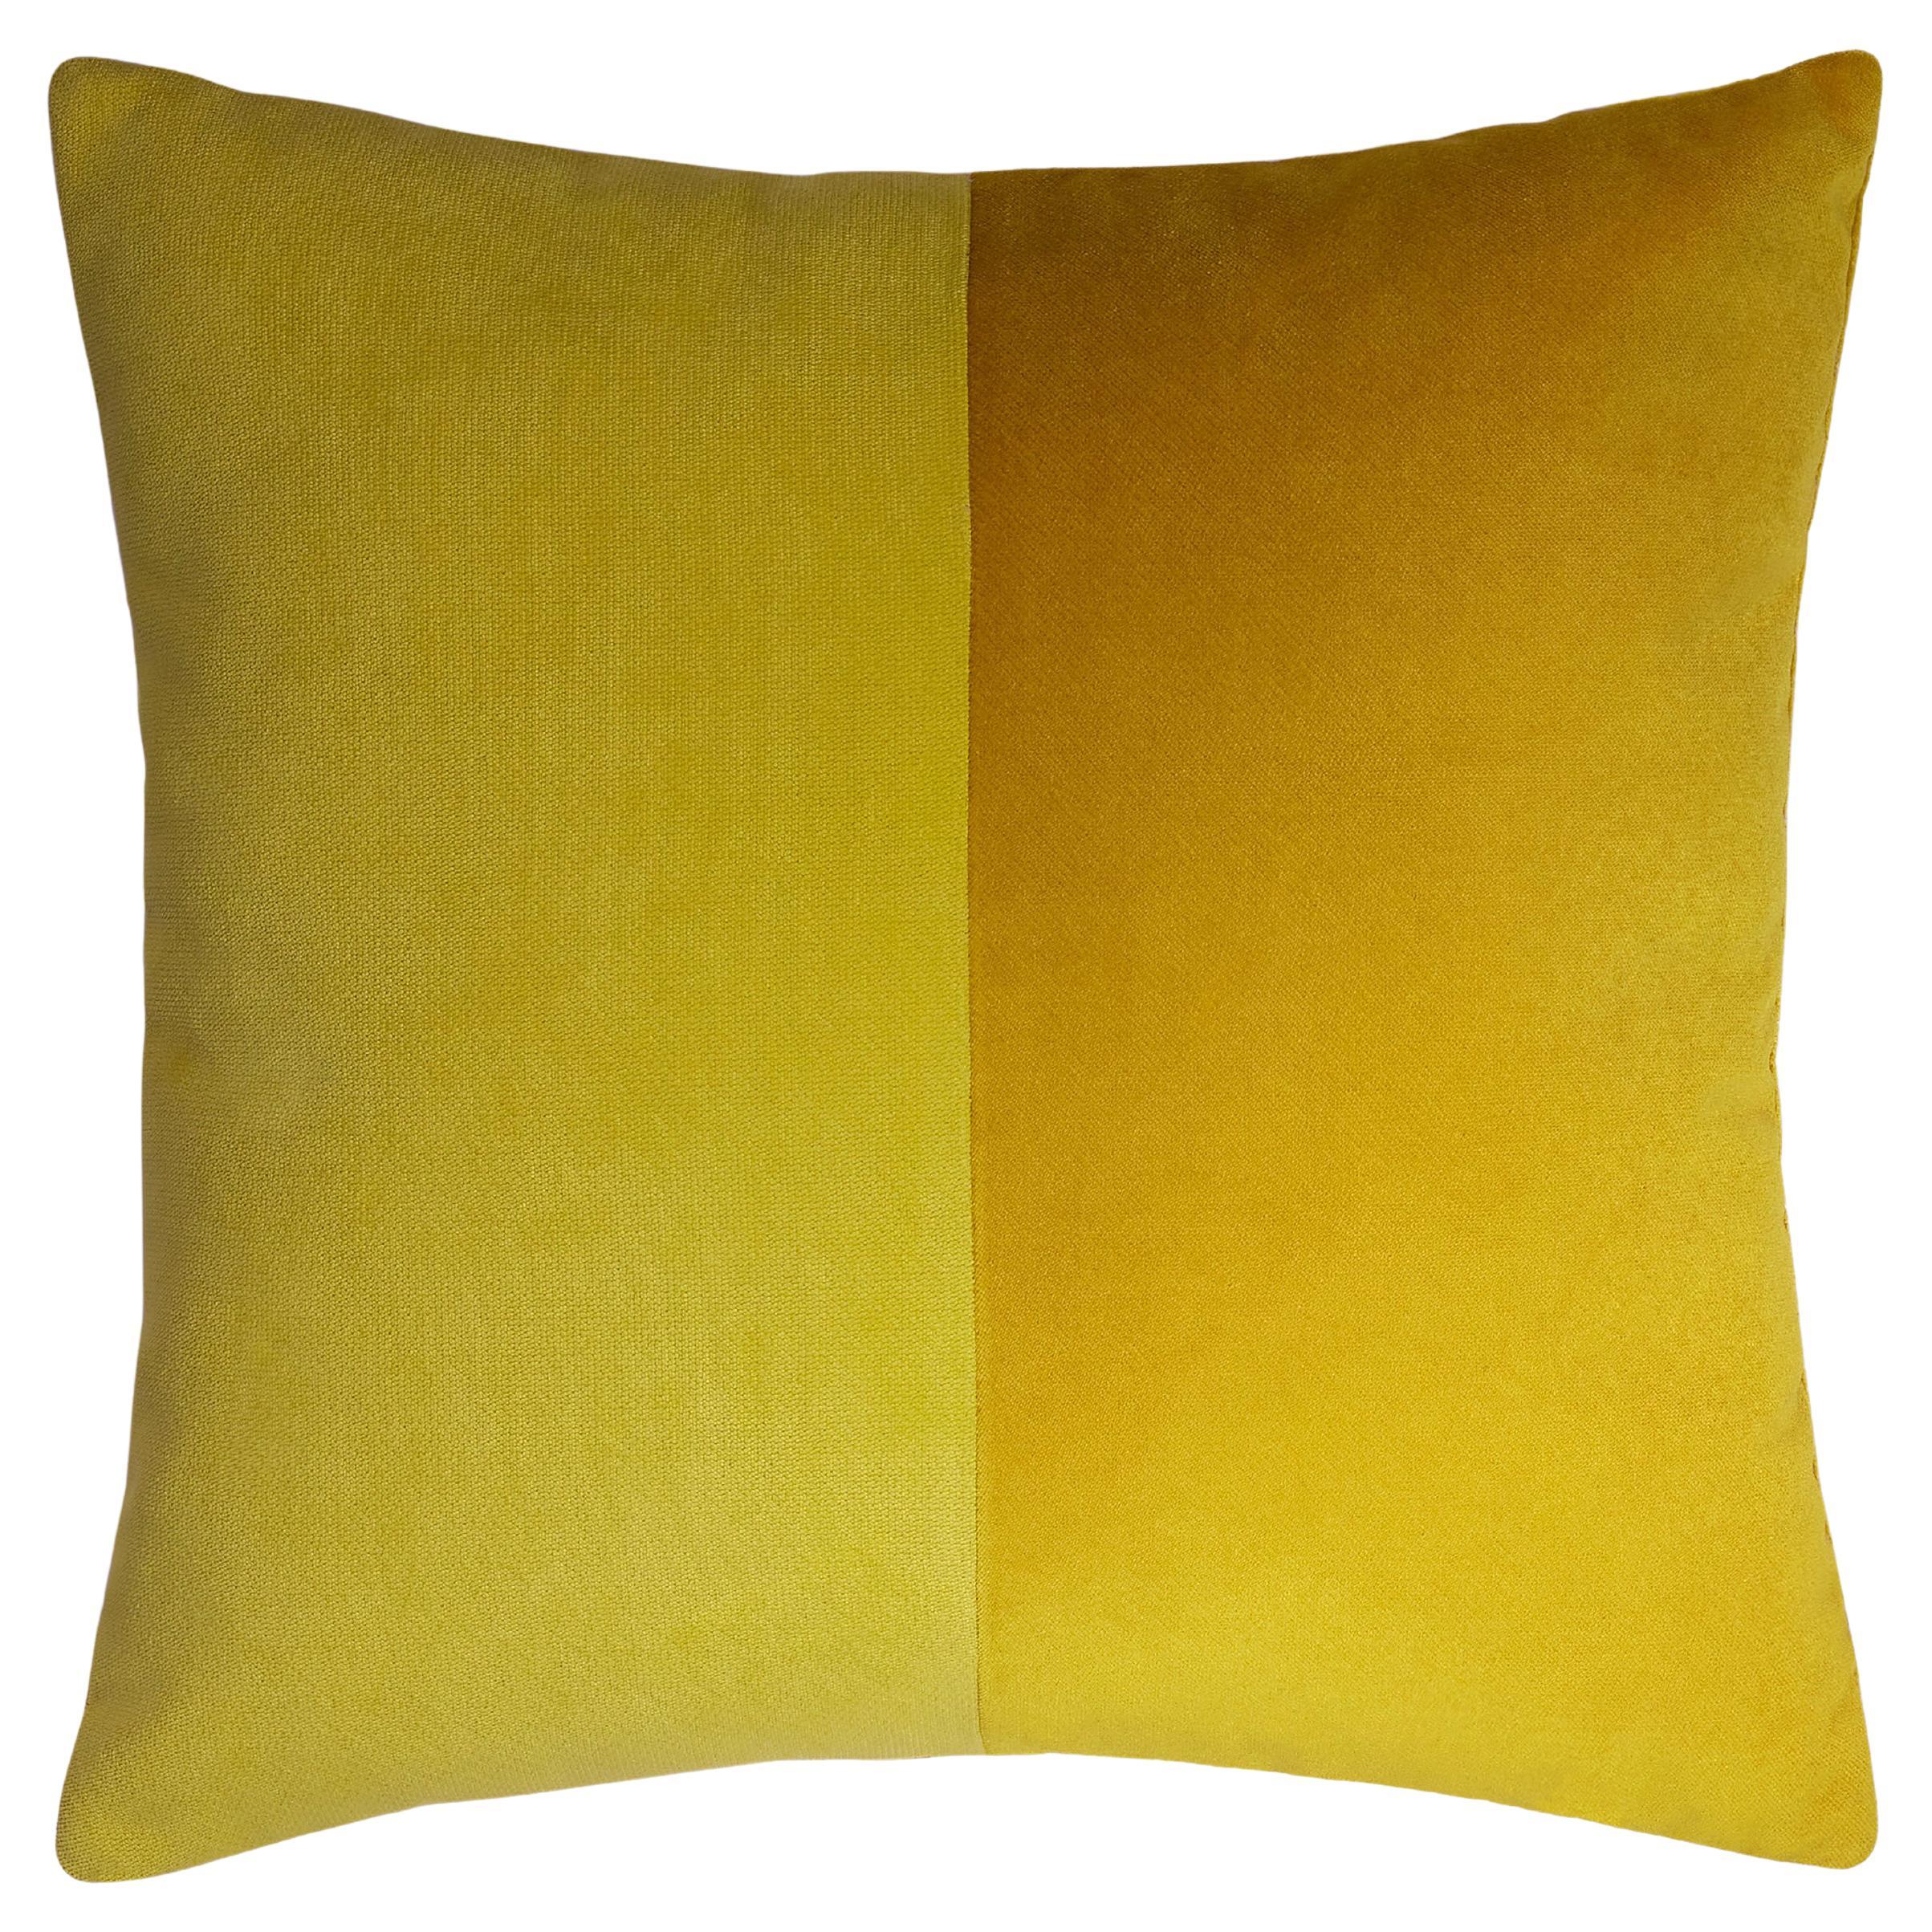 Double Mustard Cushion For Sale